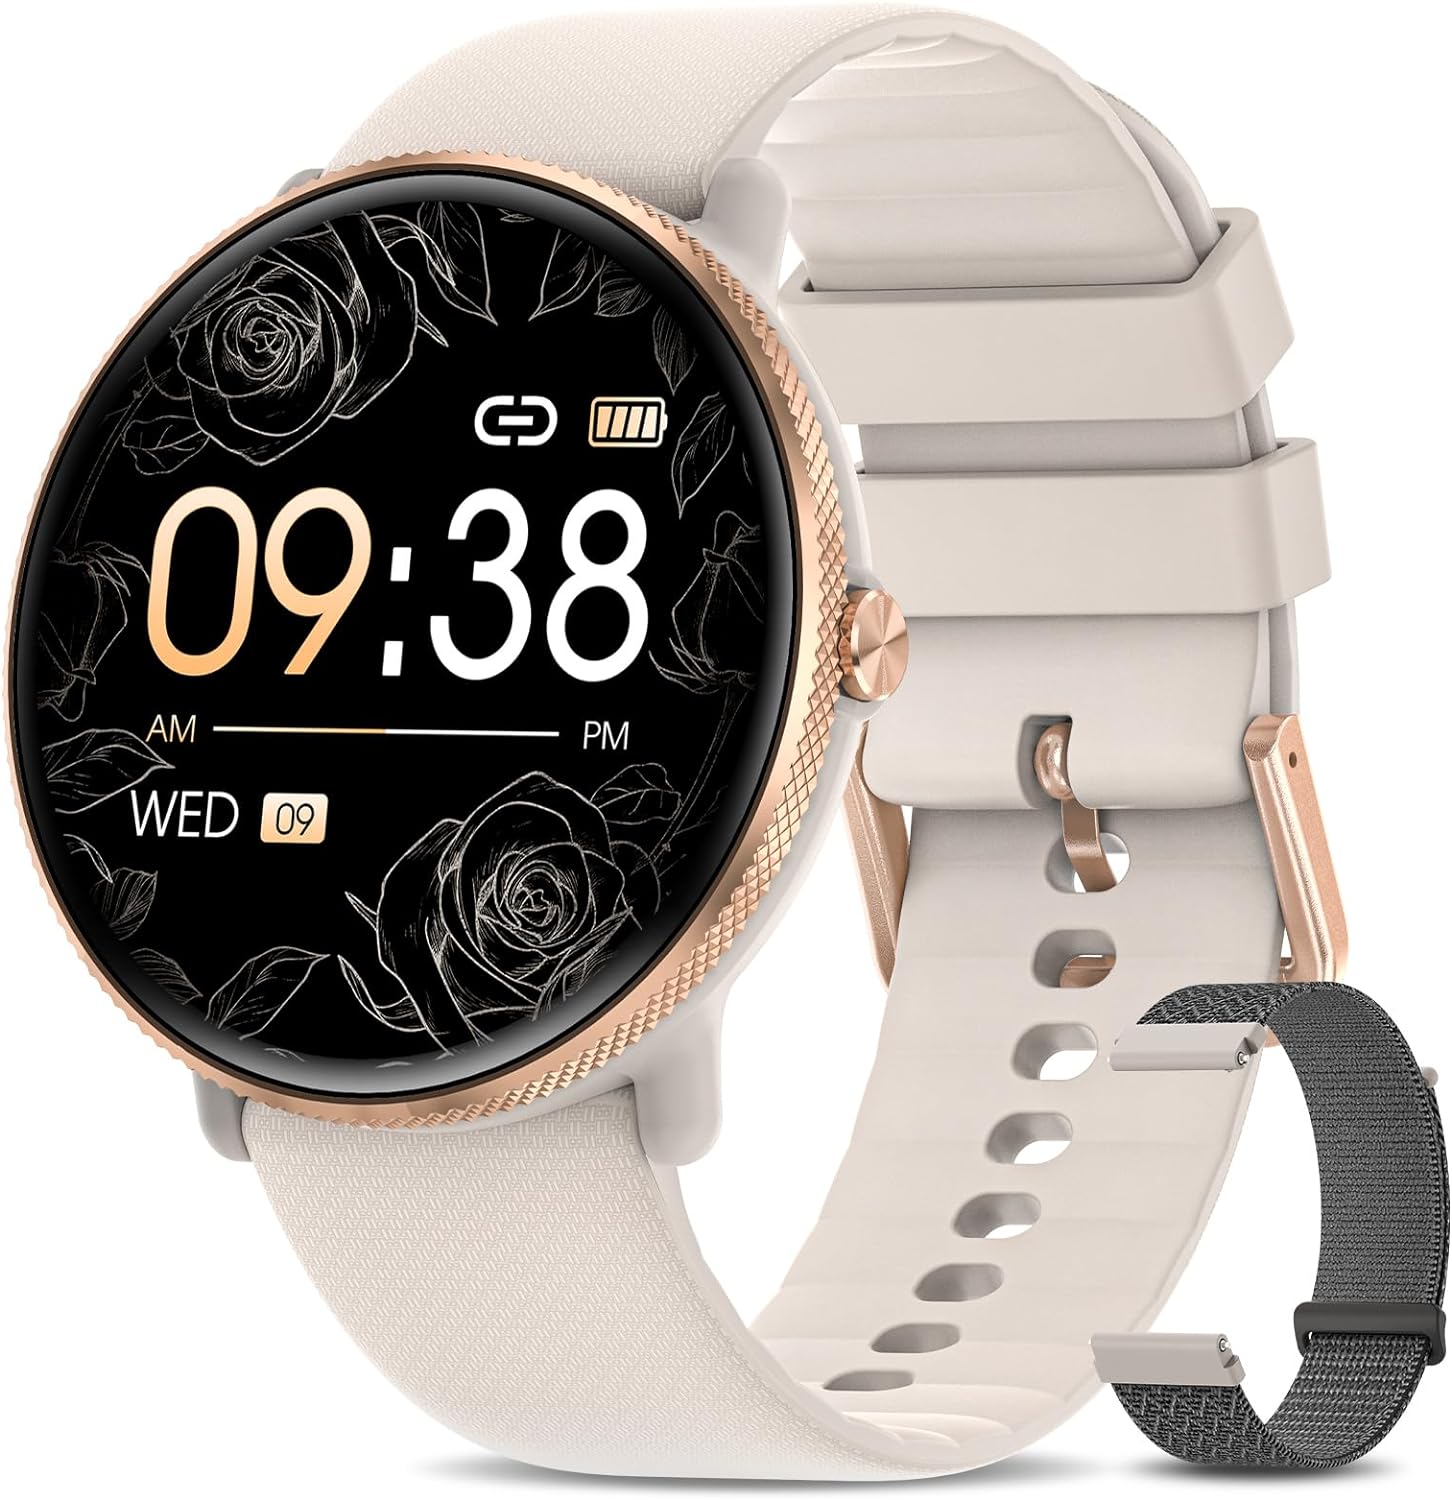 Smartwatch Womens Phone Function 1.39 Inch AMOLED HD Full Touch Screen Fitness Watch Tracker with Heart Rate / SpO2 / Sleep Monitor / Menstrual Cycle IP68 Waterproof Watch for iOS Android Grey Gold